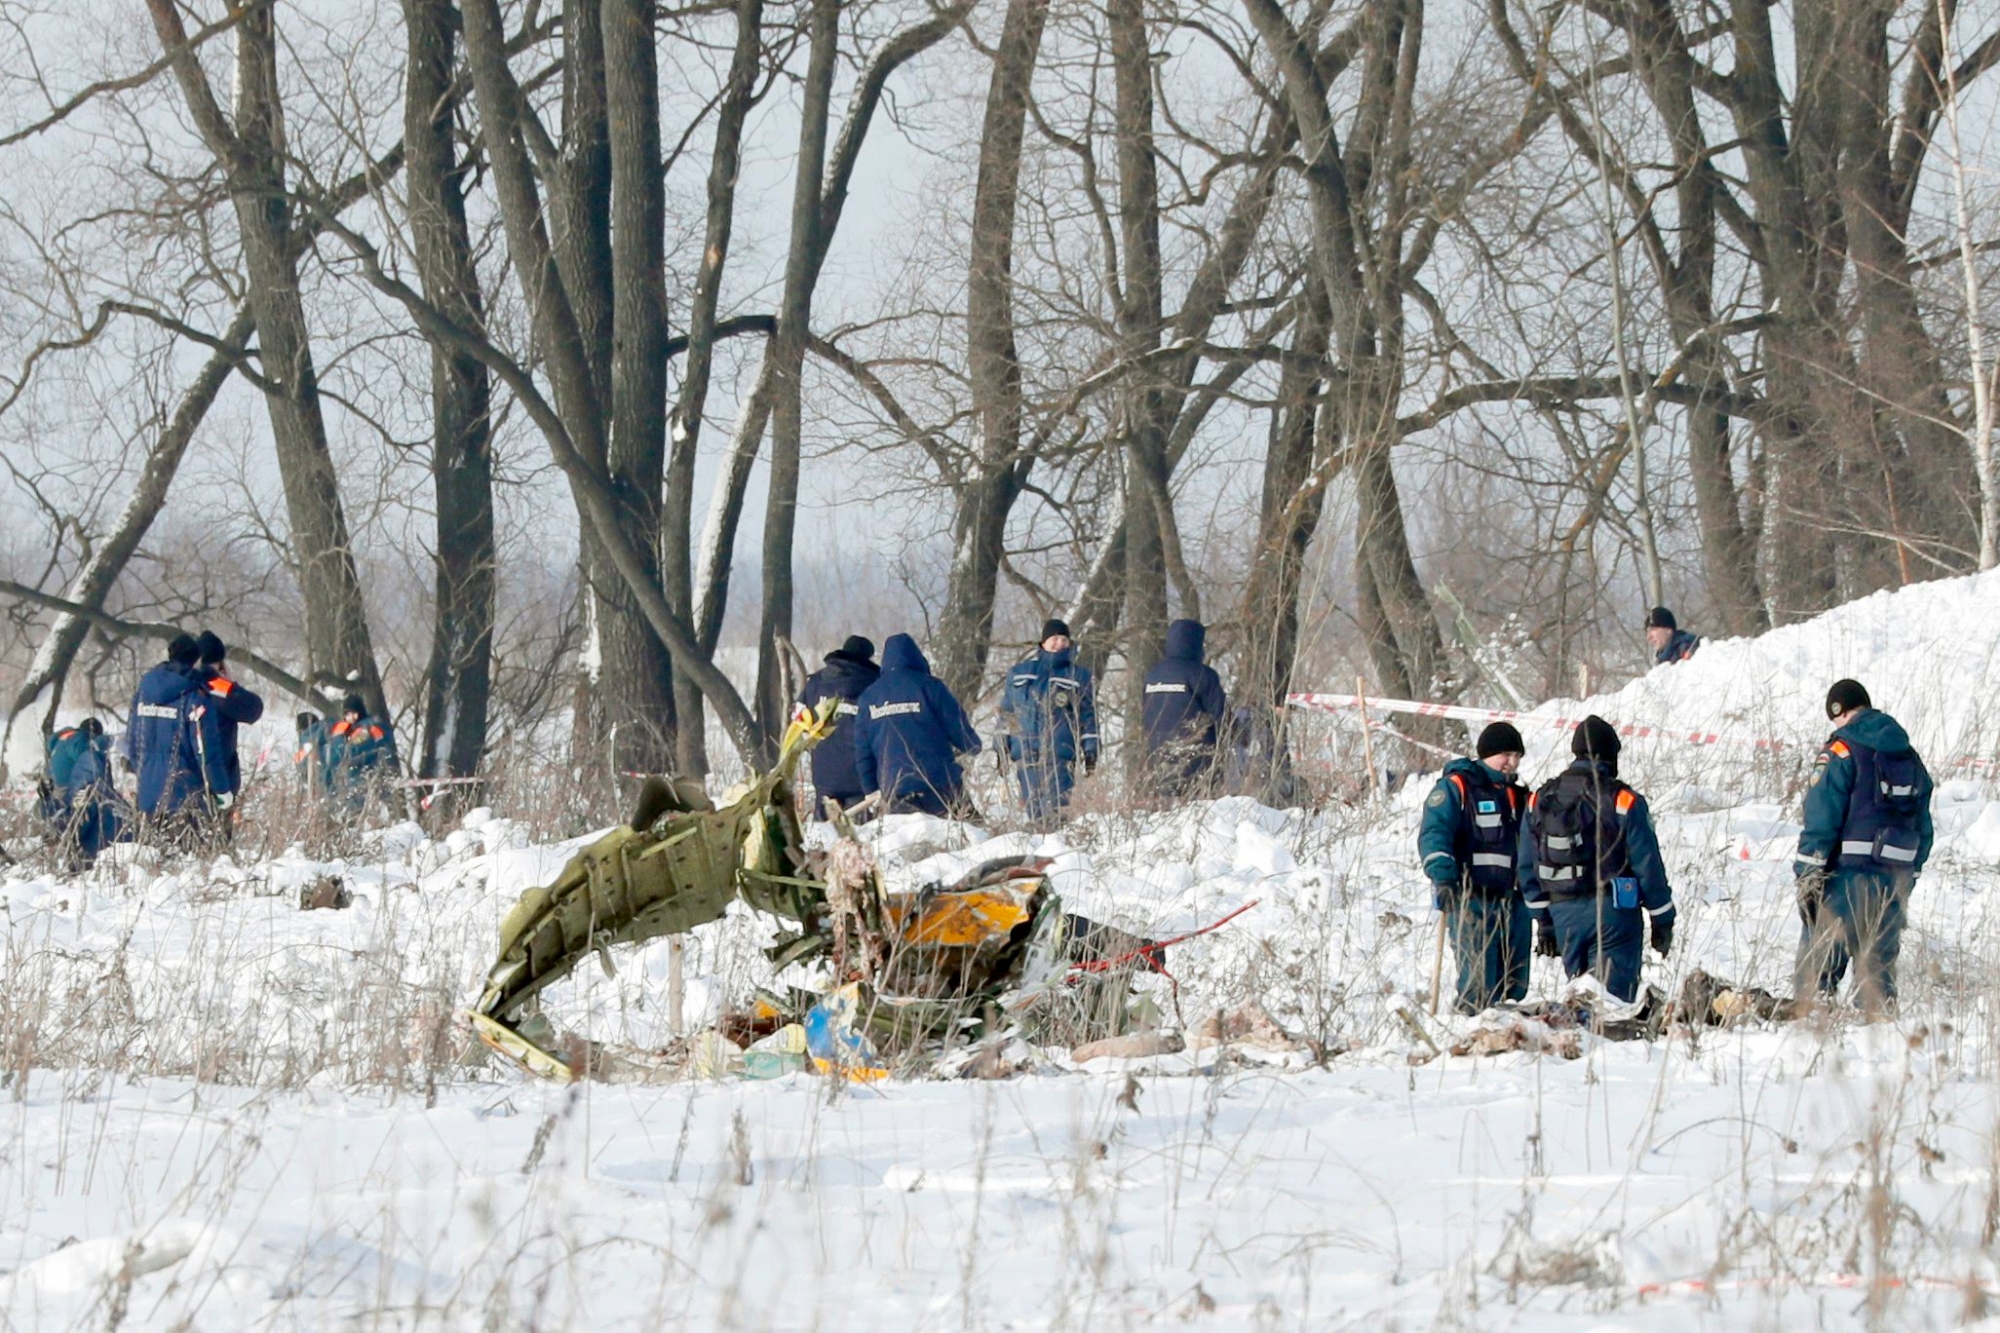 epa06517267 Russian rescuers search human remains and collect plane debris at the site of the crashed Russian Saratov Airlines Antonov AN-148 passenger plane near the Stepanovskoy village near Argunovo, Ramensky district, Moscow region, Russia, 11 February 2018. A Russian Antonov AN-148 crashed shortly after take off from Domodedovo airport outside Moscow. All 71 people aboard are believed to have died in the crash. The plane of Saratov airlines was en route from Moscow to Orsk, Orenburg region.  EPA/YURI KOCHETKOV RUSSIA PLANE CRASH